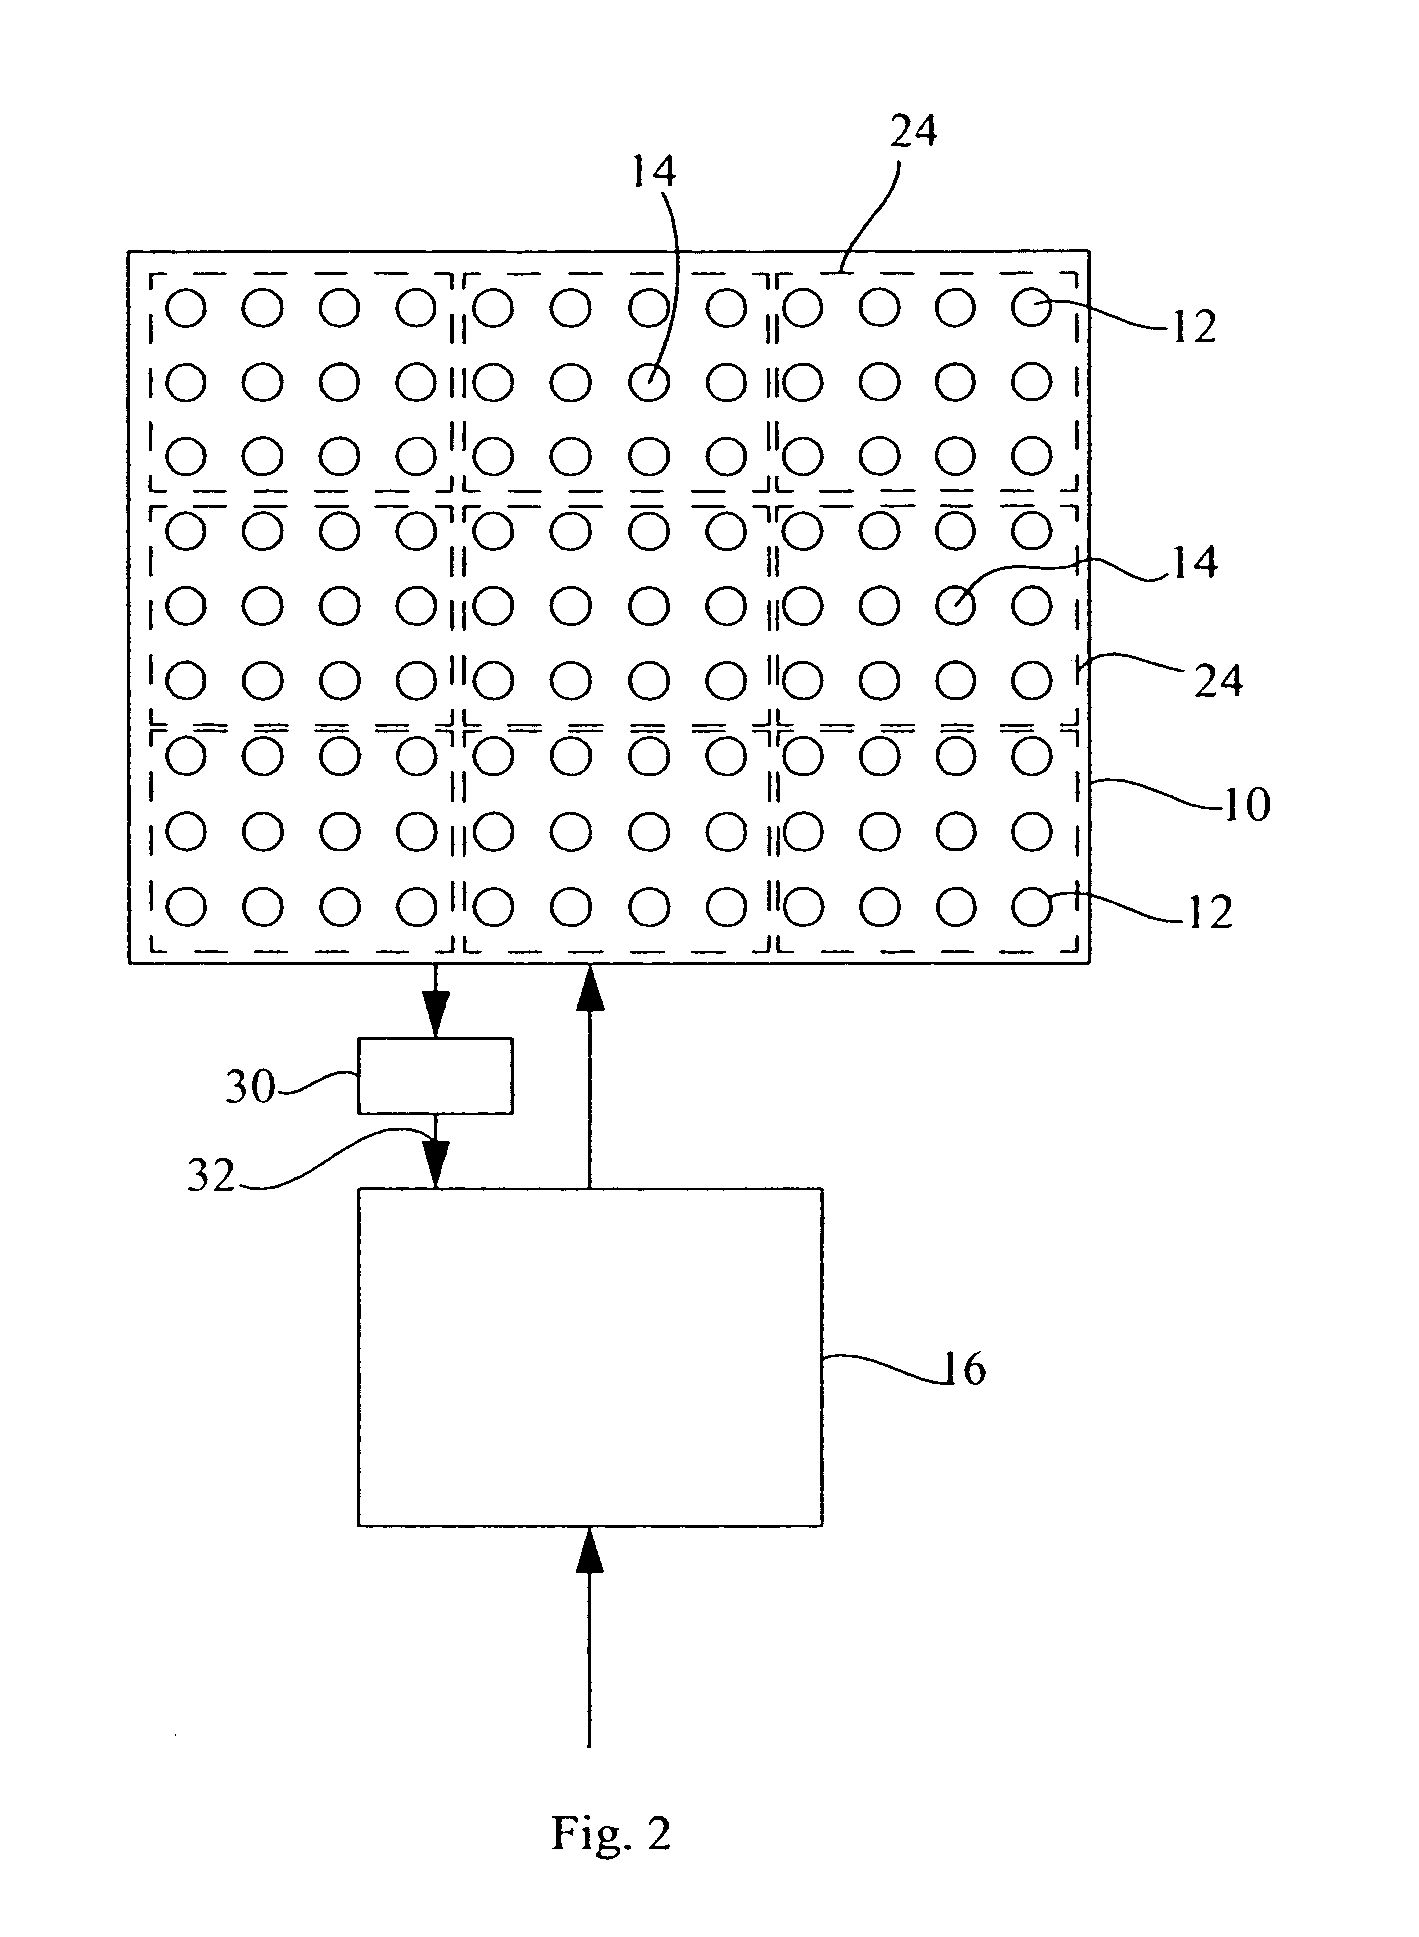 Method and apparatus for uniformity and brightness correction in an amoled display